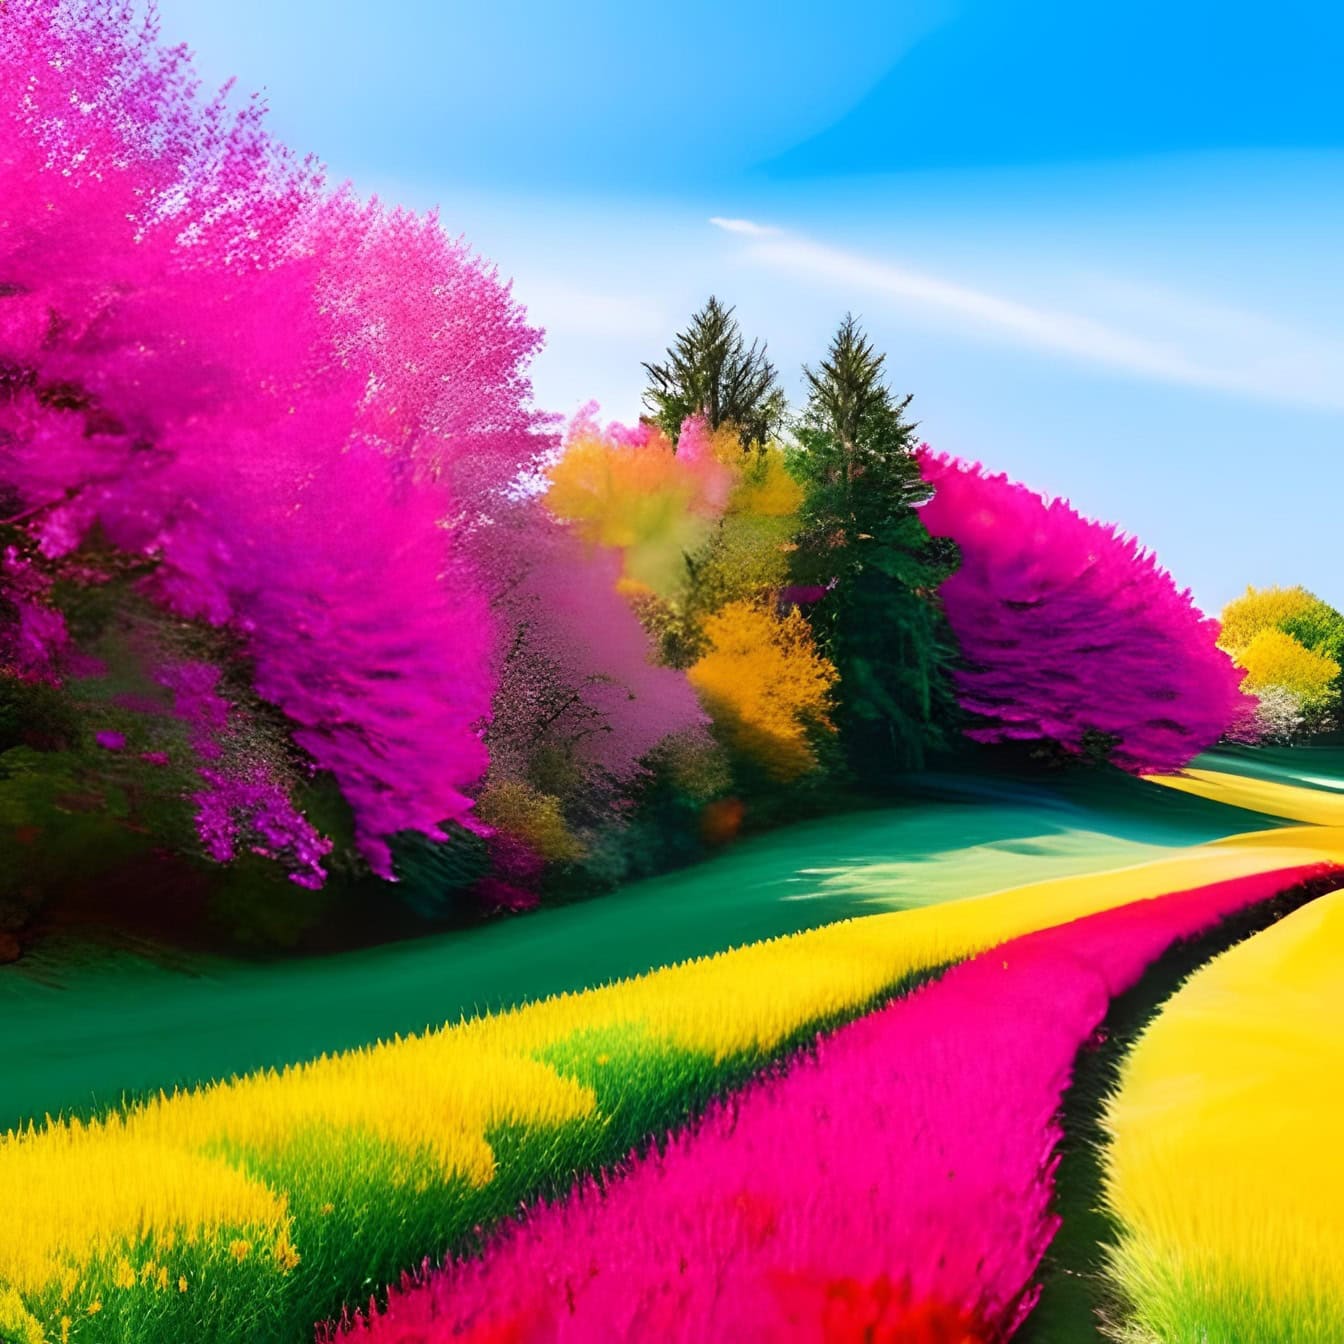 A vivid graphic illustration with purple-pink tones of fields and trees